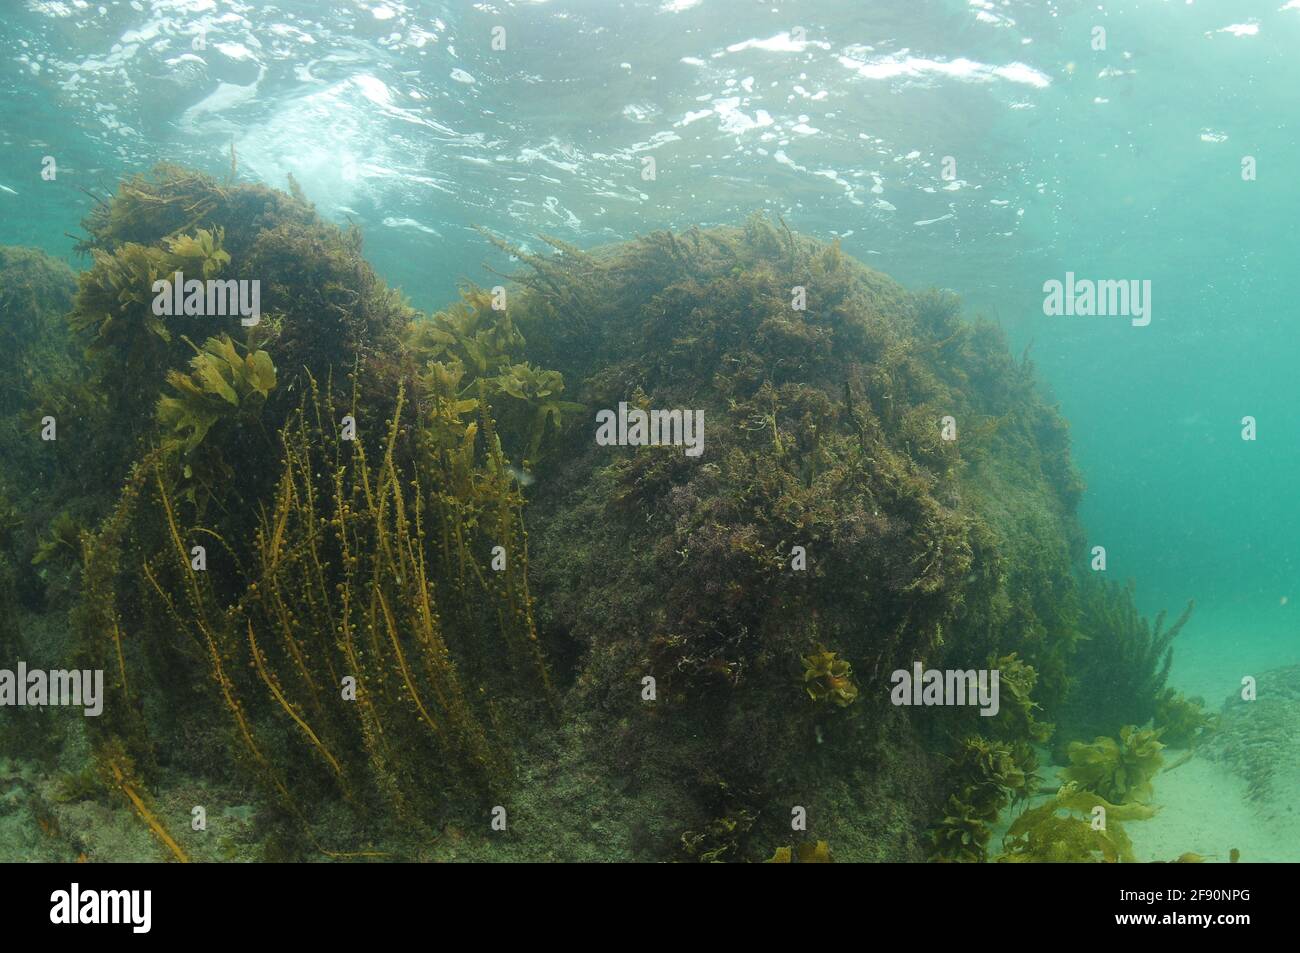 Rocky reef covered with brown sea weeds reaching to sea surface in turbid water caused by oceanic swell. Stock Photo